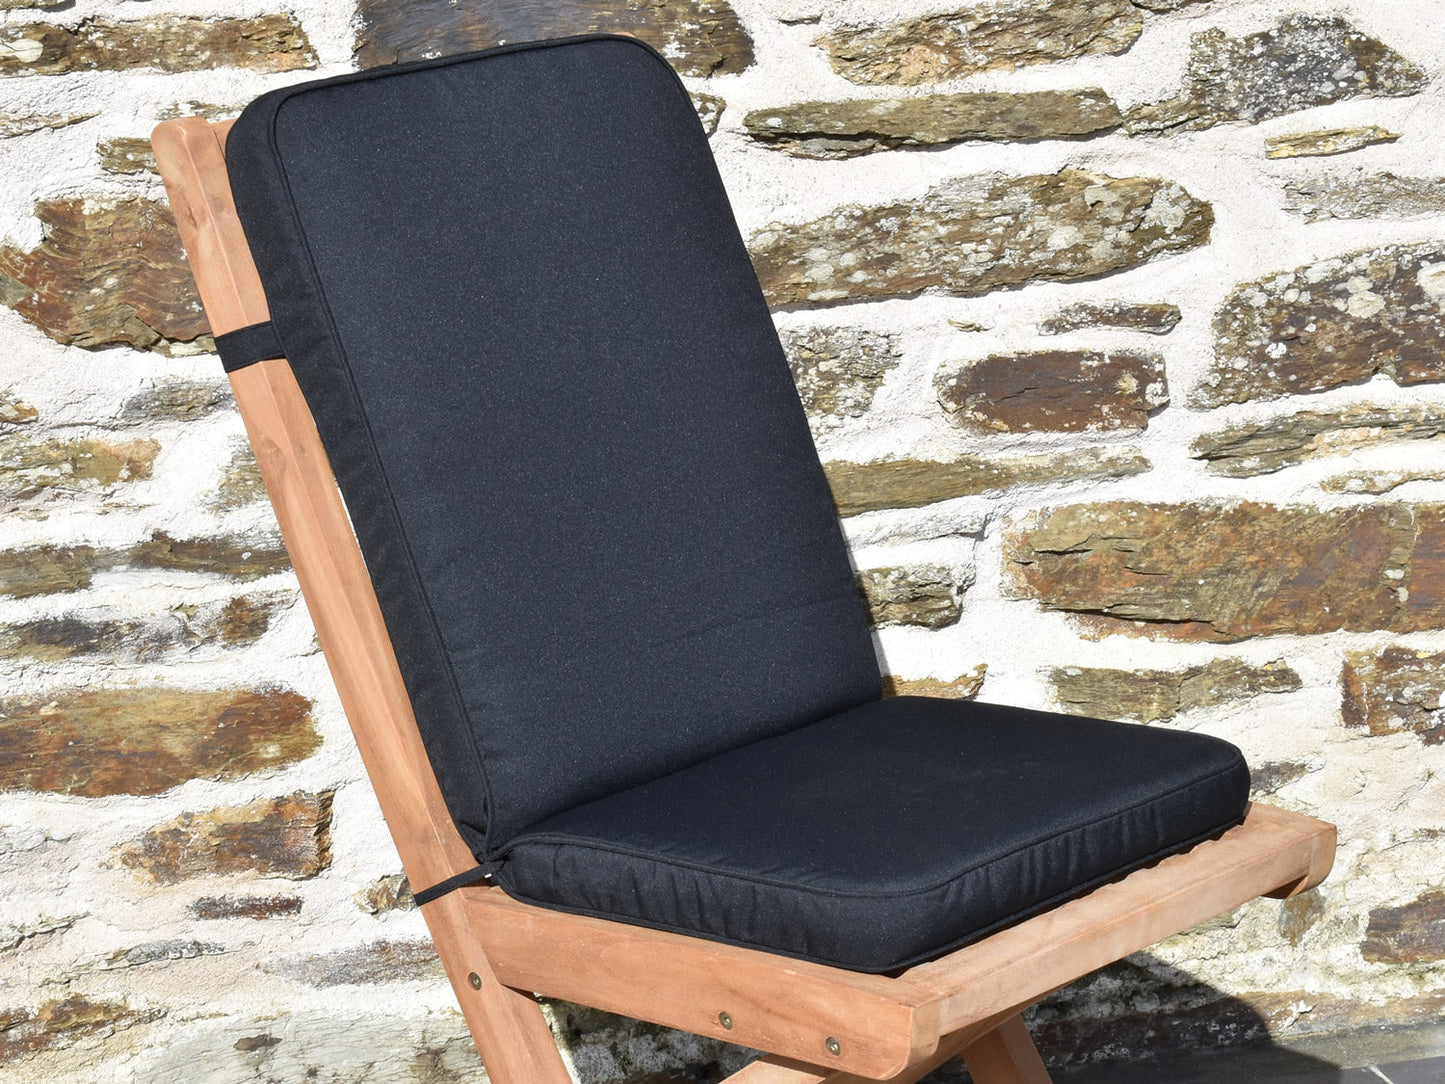 close-up of black folding pad/back garden chair cushion, finished with matching black fabric piping, ties and back strap